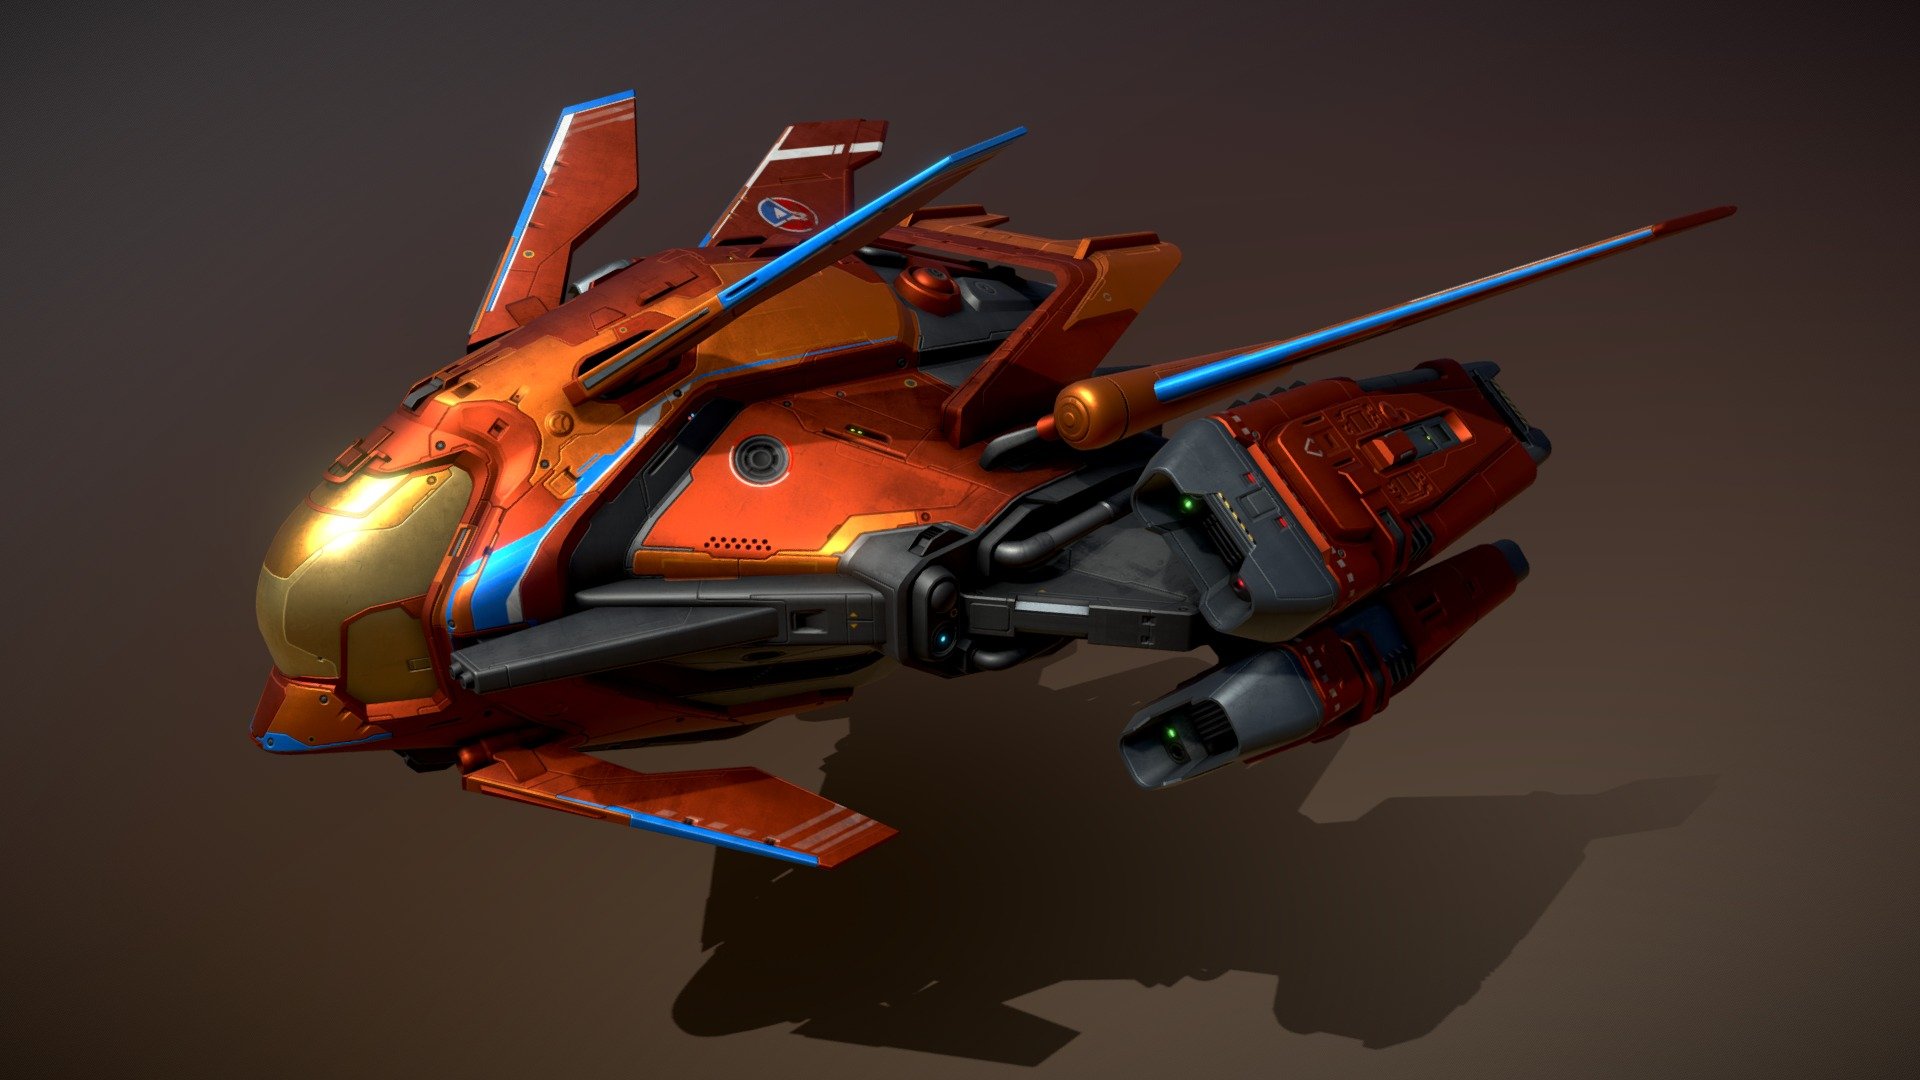 This Original package contains one SPARROW Fighter Spacecraft. This design is my own concept, does not repeat any existing work. You can use it without a doubt about copyright 3d model